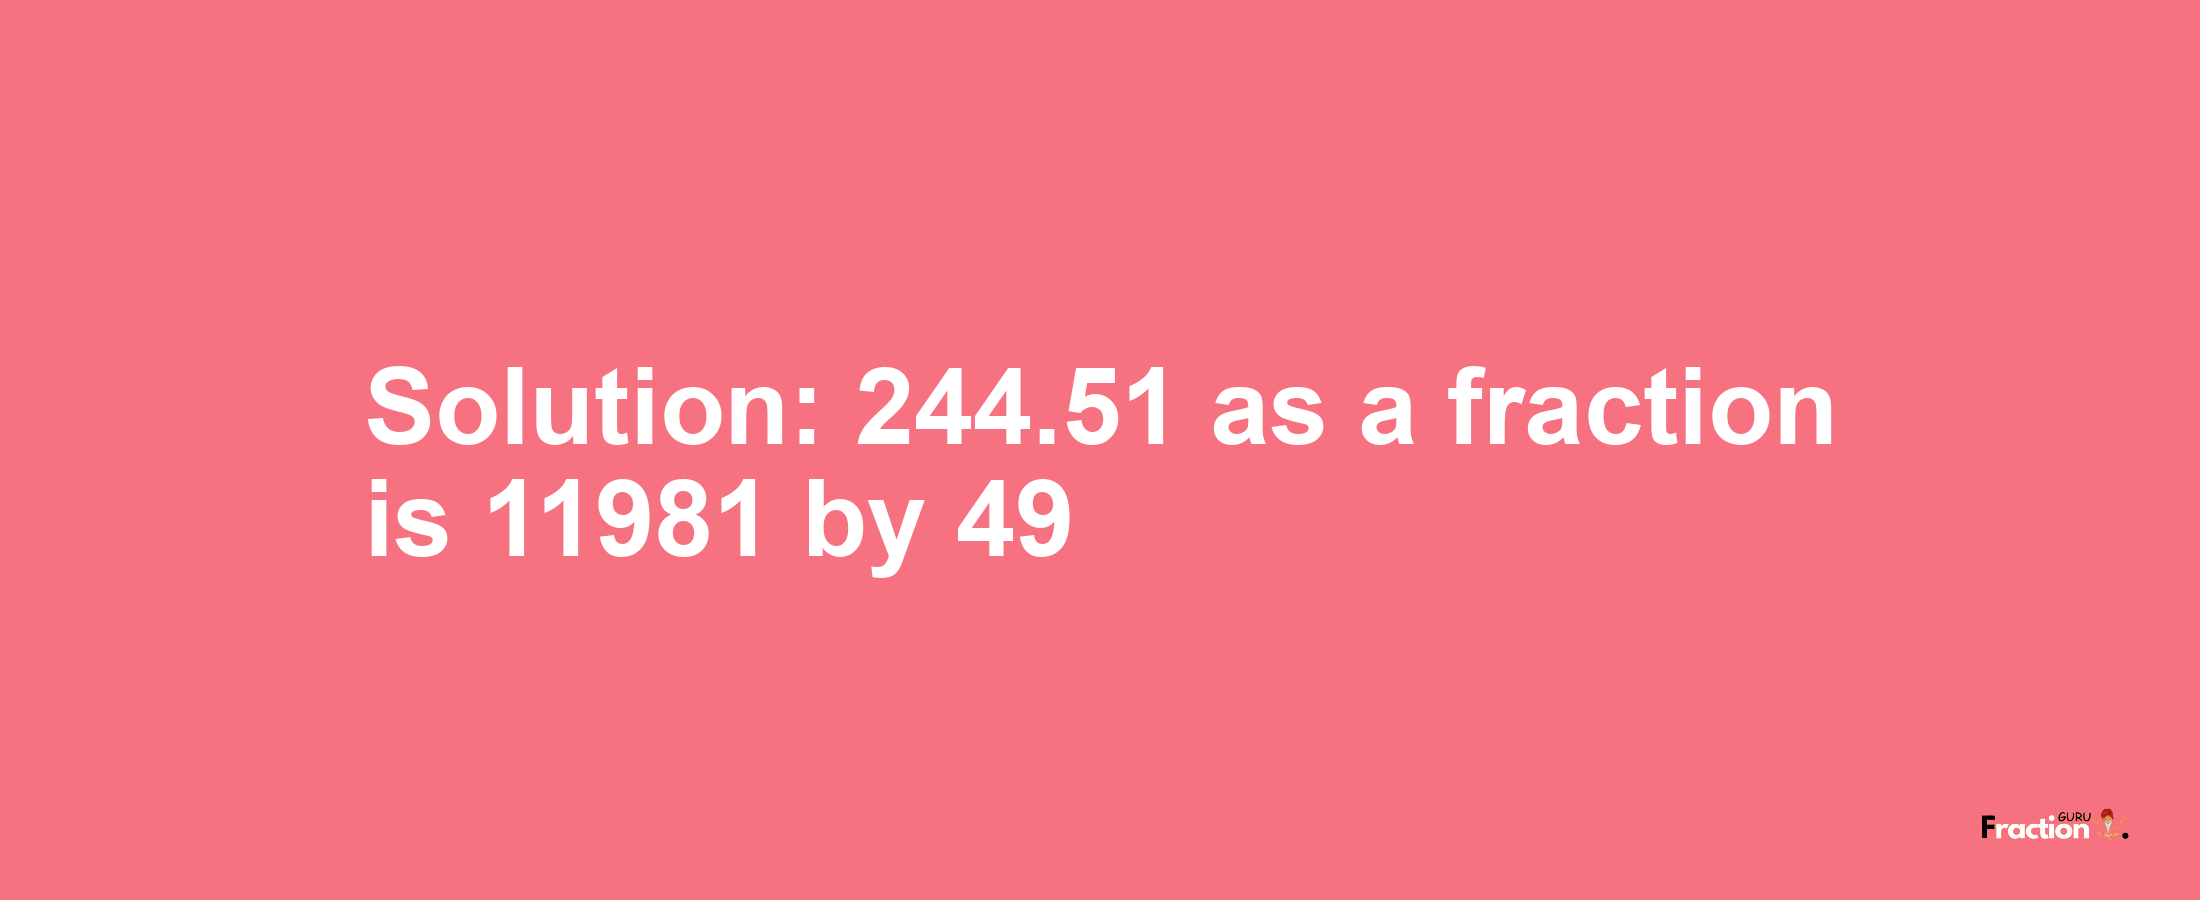 Solution:244.51 as a fraction is 11981/49